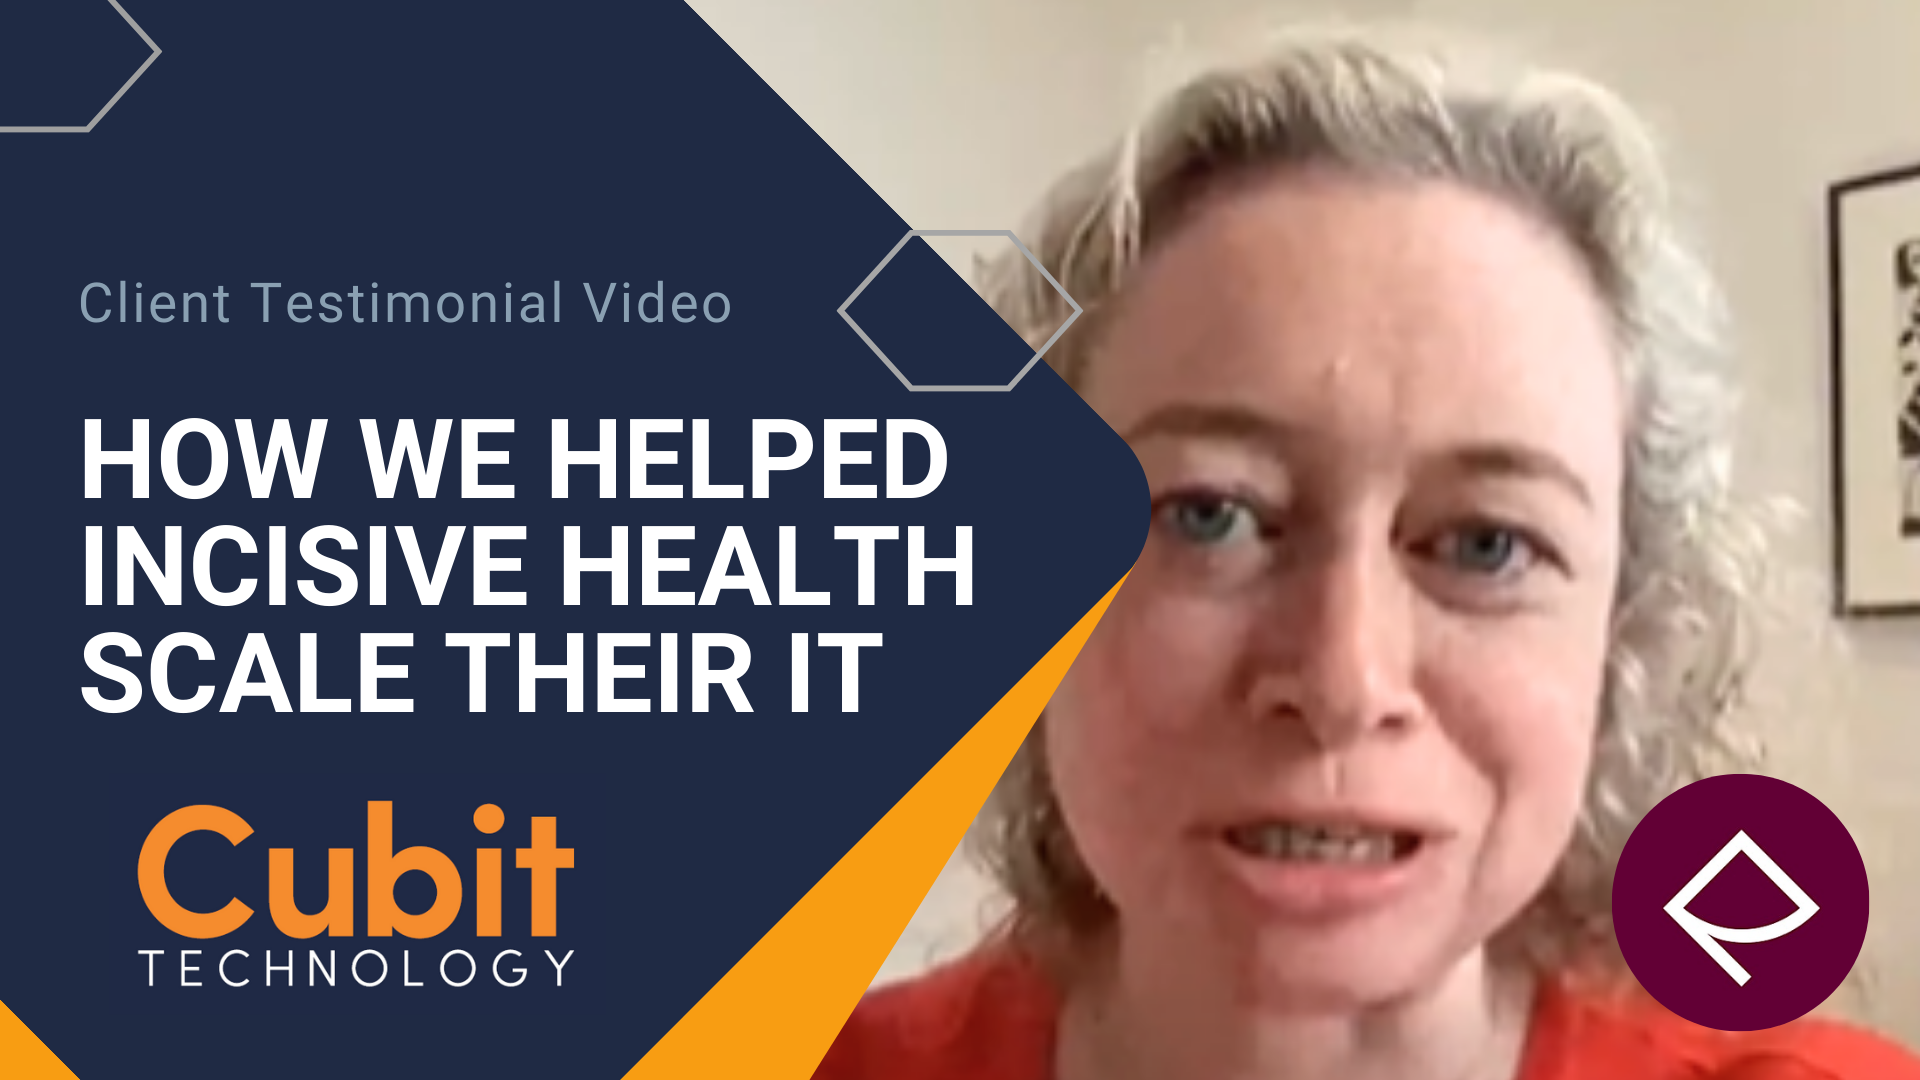 How We Helped Incisive Health Scale Their IT Cubit Technology